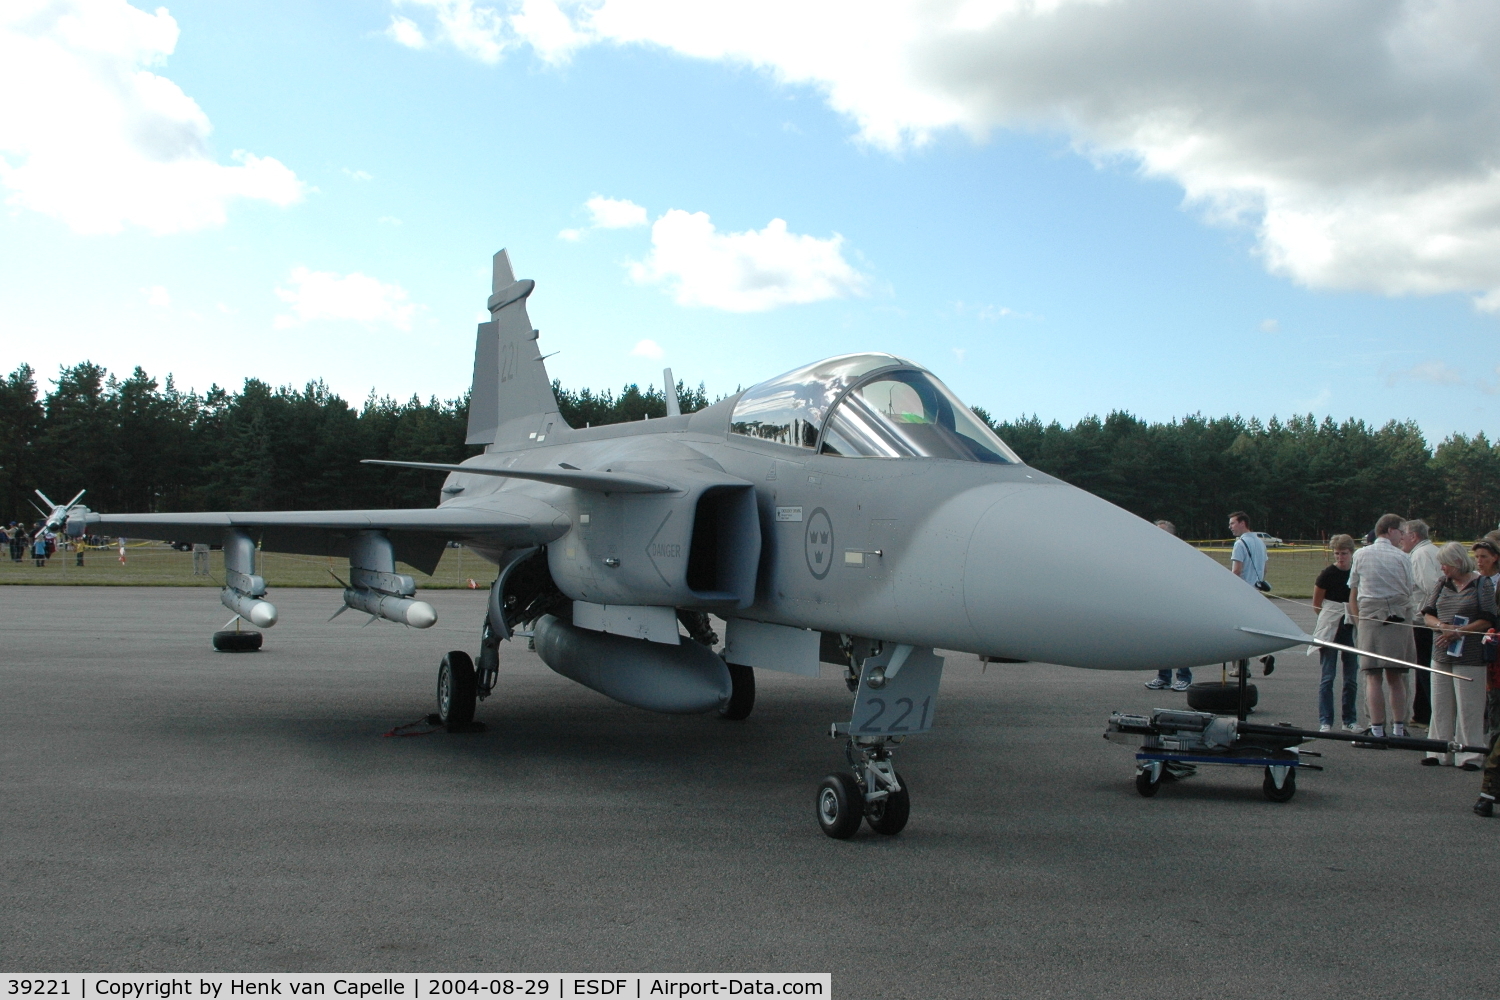 39221, Saab JAS-39C Gripen C/N 39221, Saab JAS39C Gripen fighter of the Swedish Air Force at Ronneby Air Base.